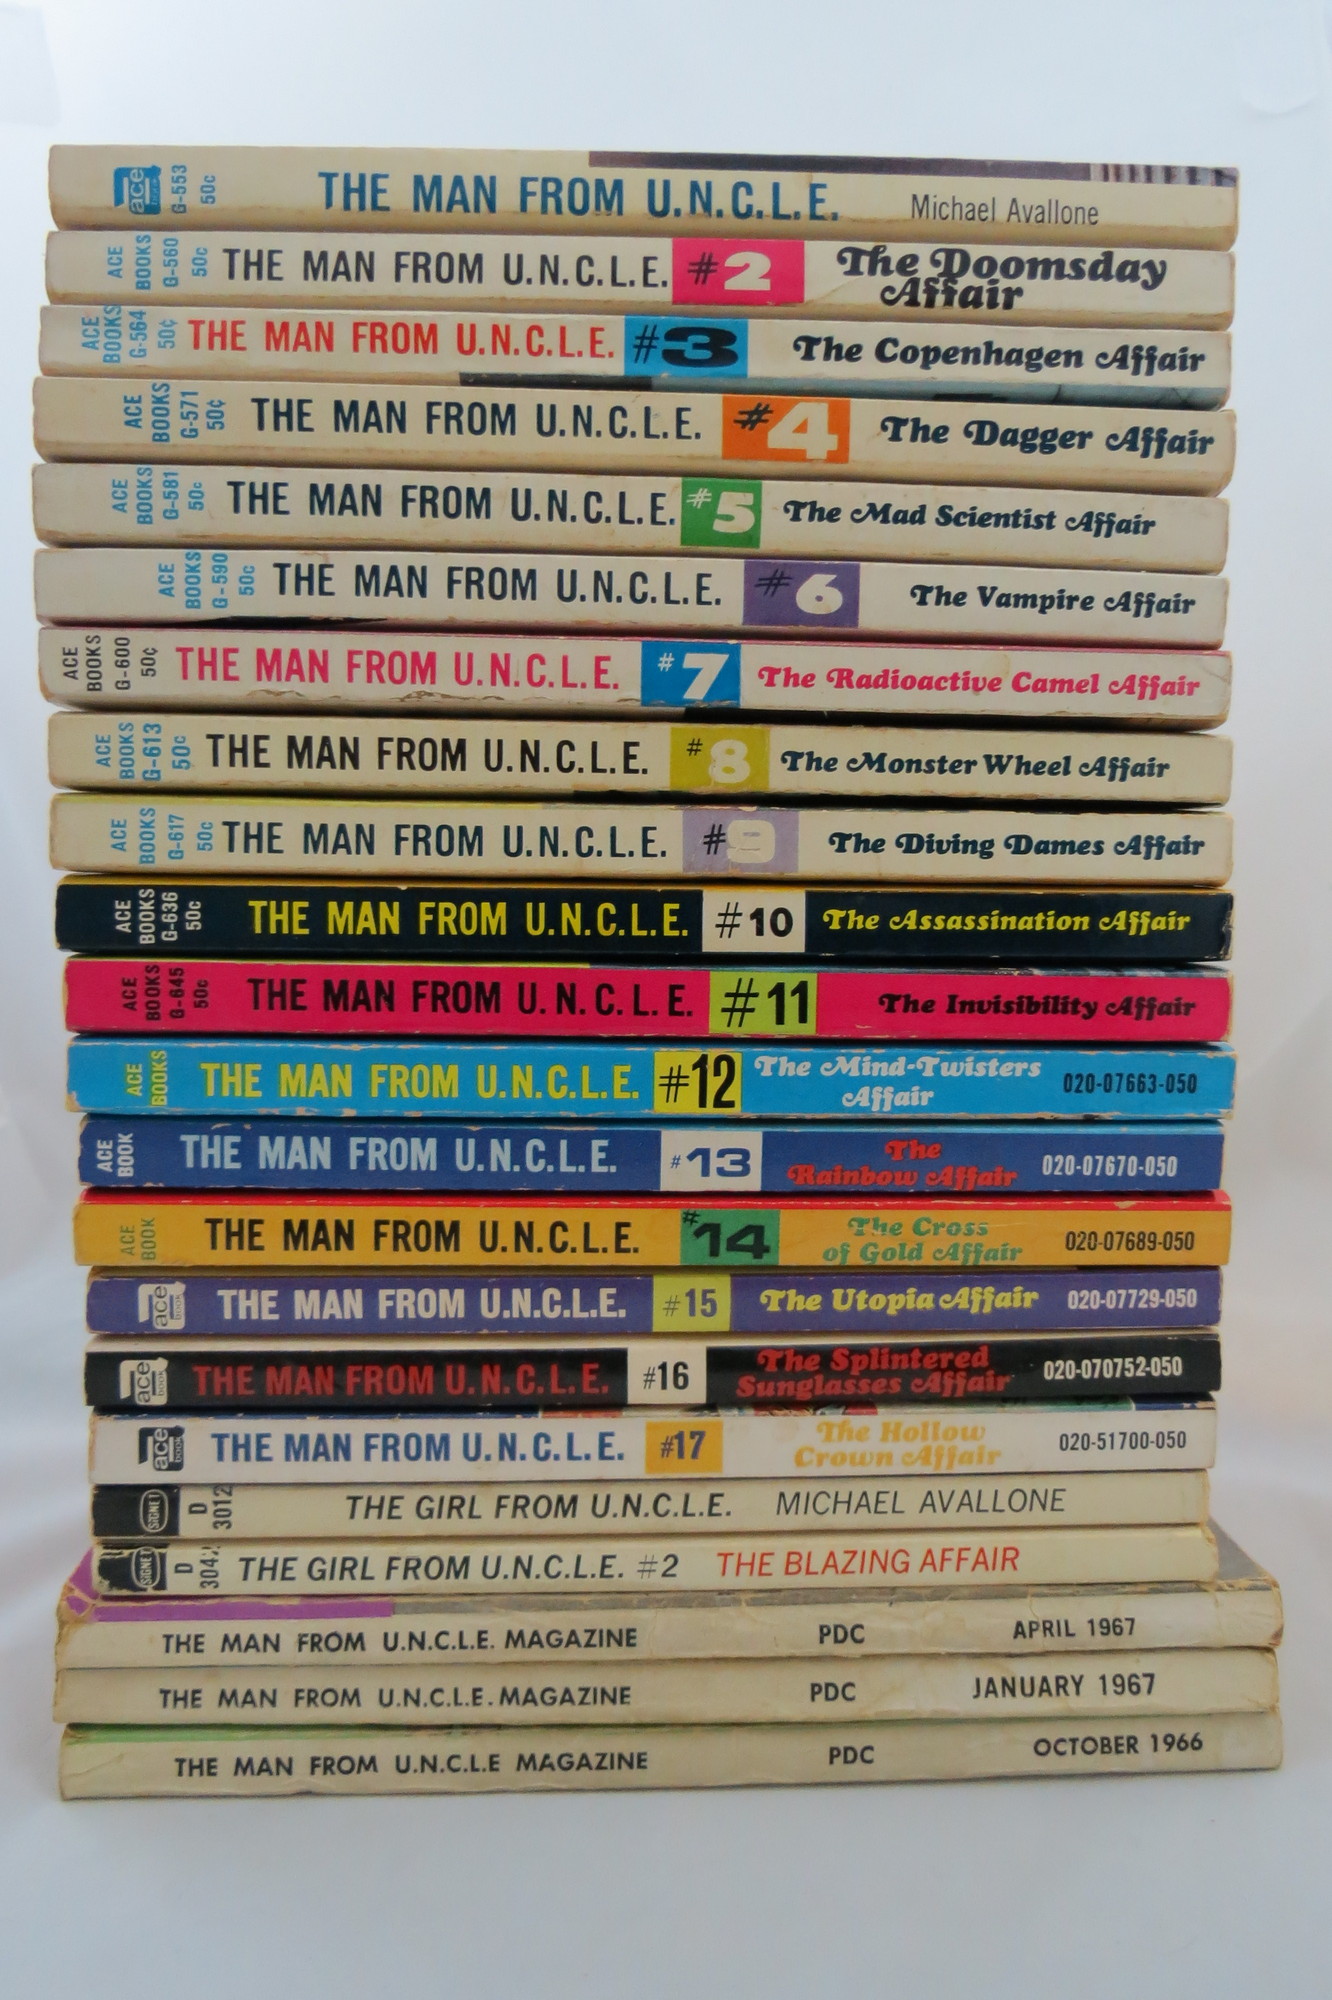 Image for THE MAN FROM U.N.C.L.E. (#1-17) ; PLUS THE GIRL FROM U.N.C.L.E (#1-2) ; PLUS THE MAN FROM U.N.C.L.E. MAGAZINE (3 ISSUES)